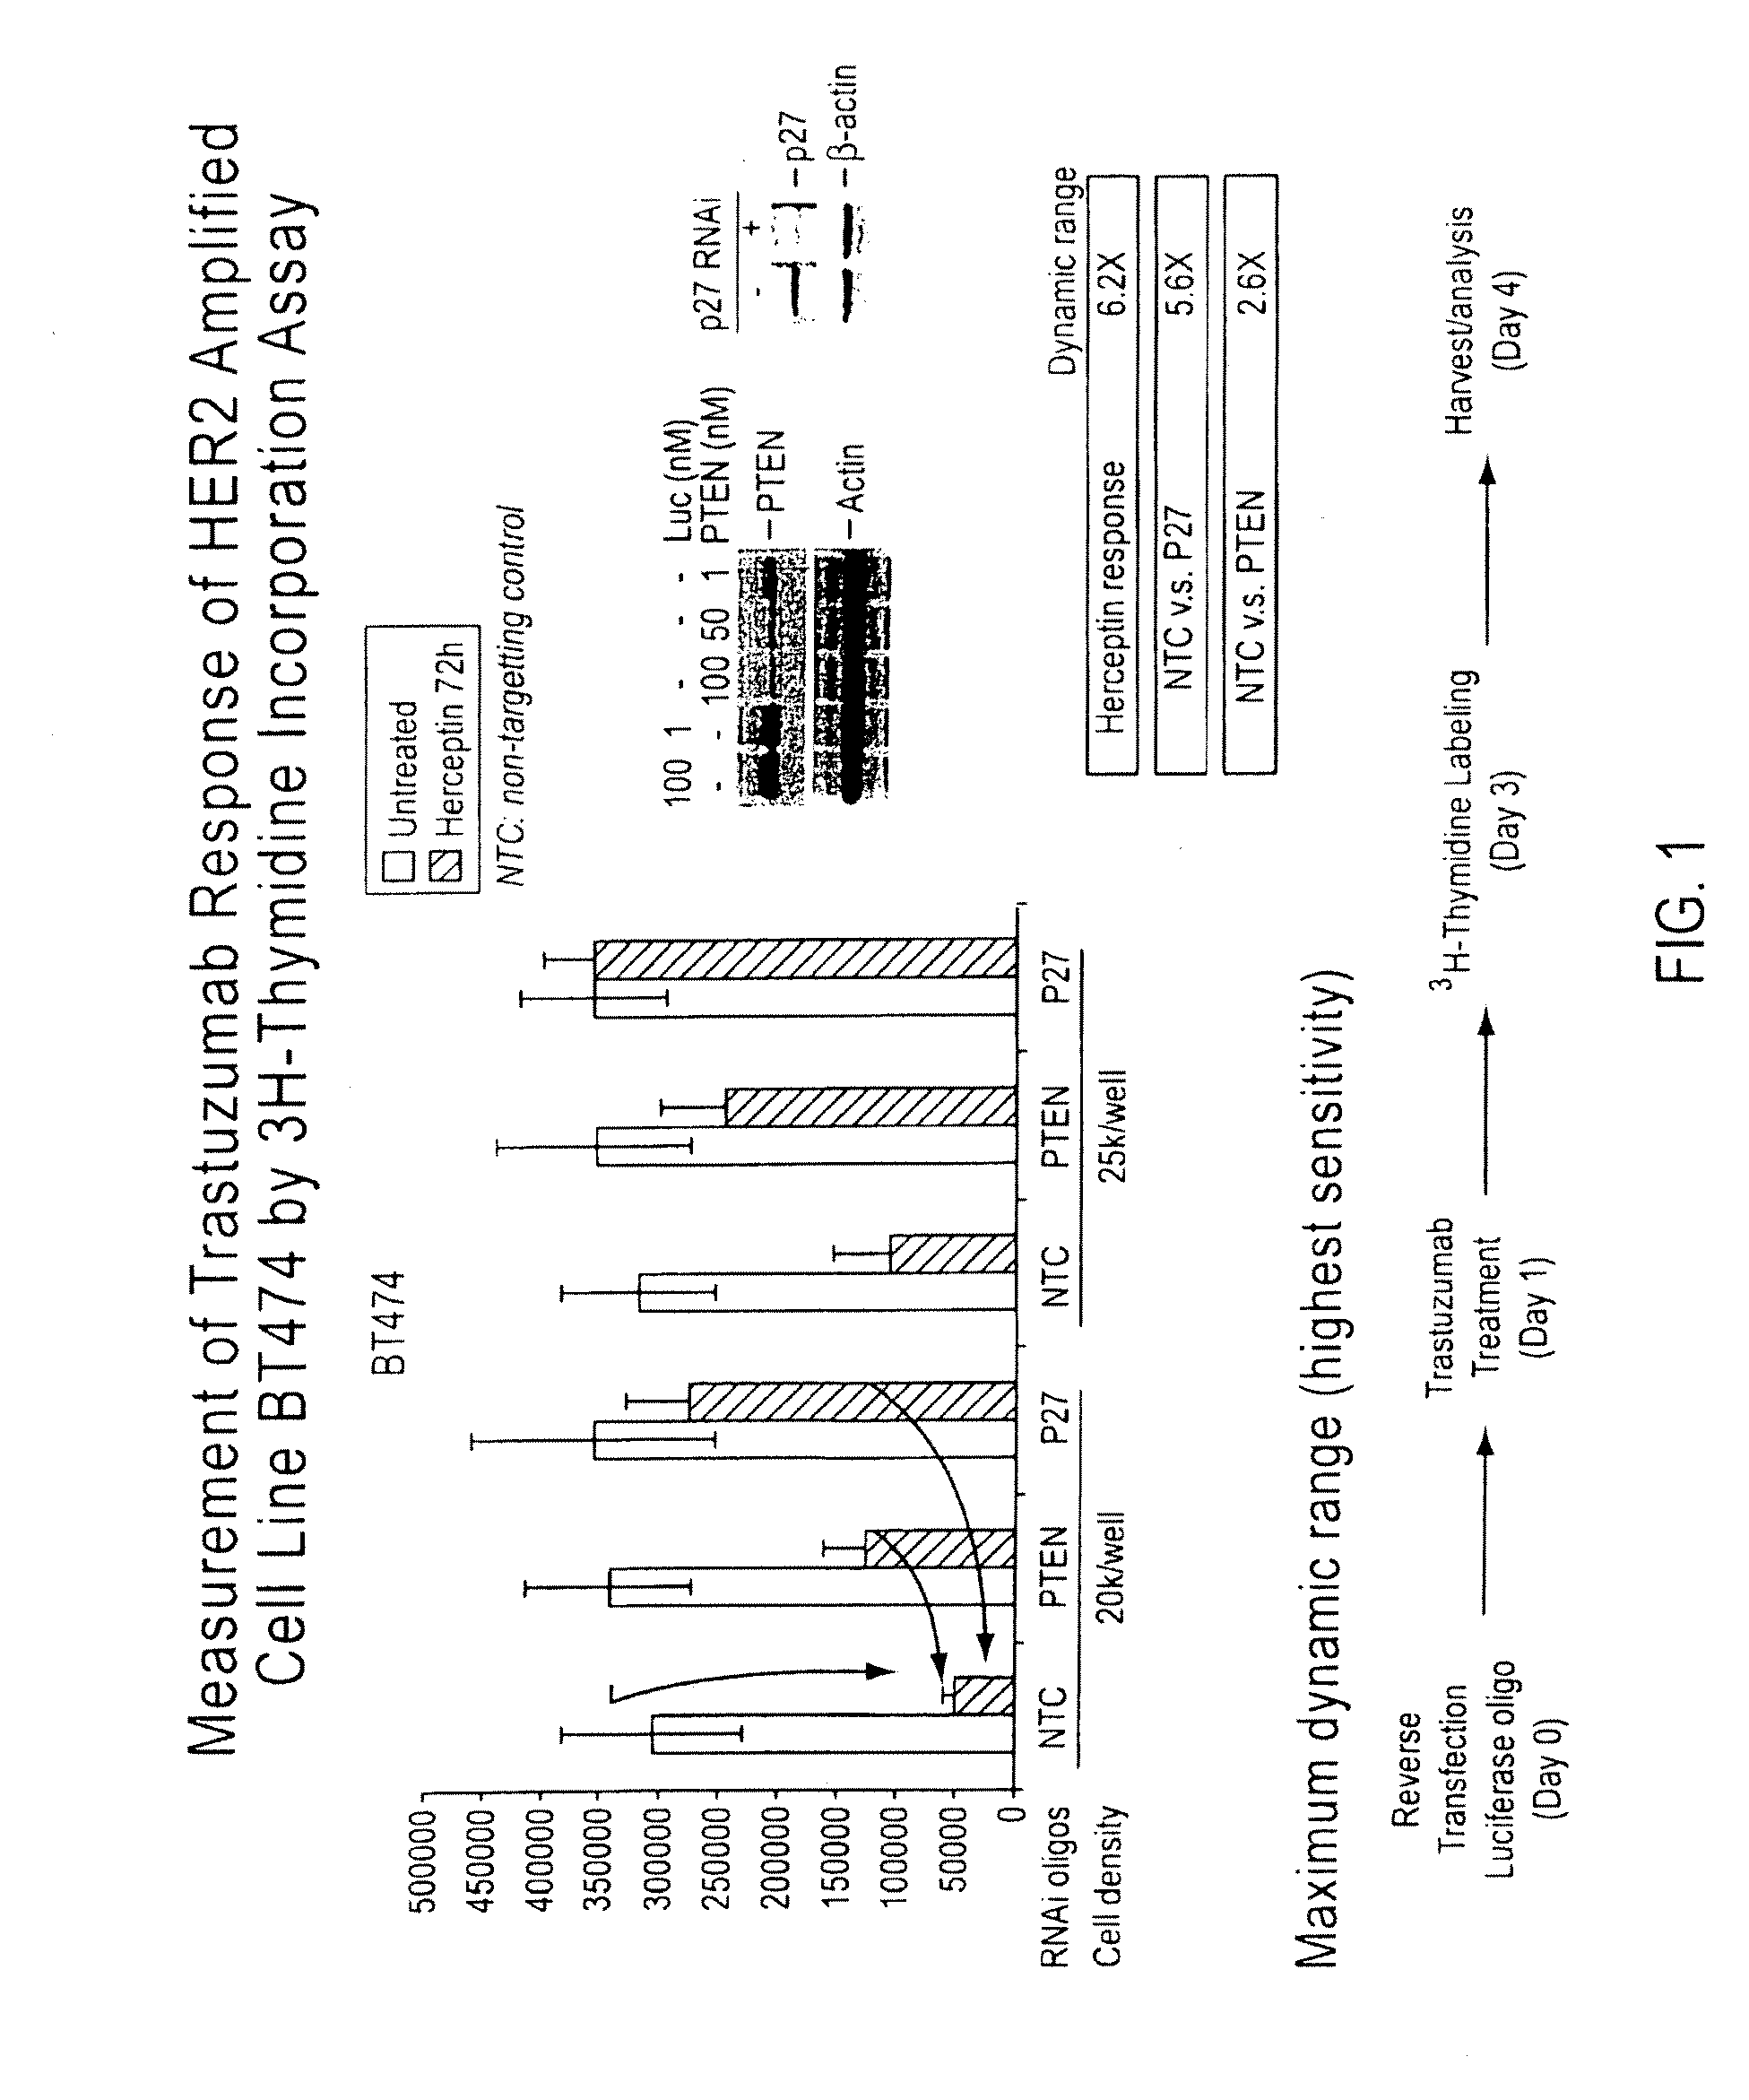 Gene expression markers of tumor resistance to her2 inhibitor treatment